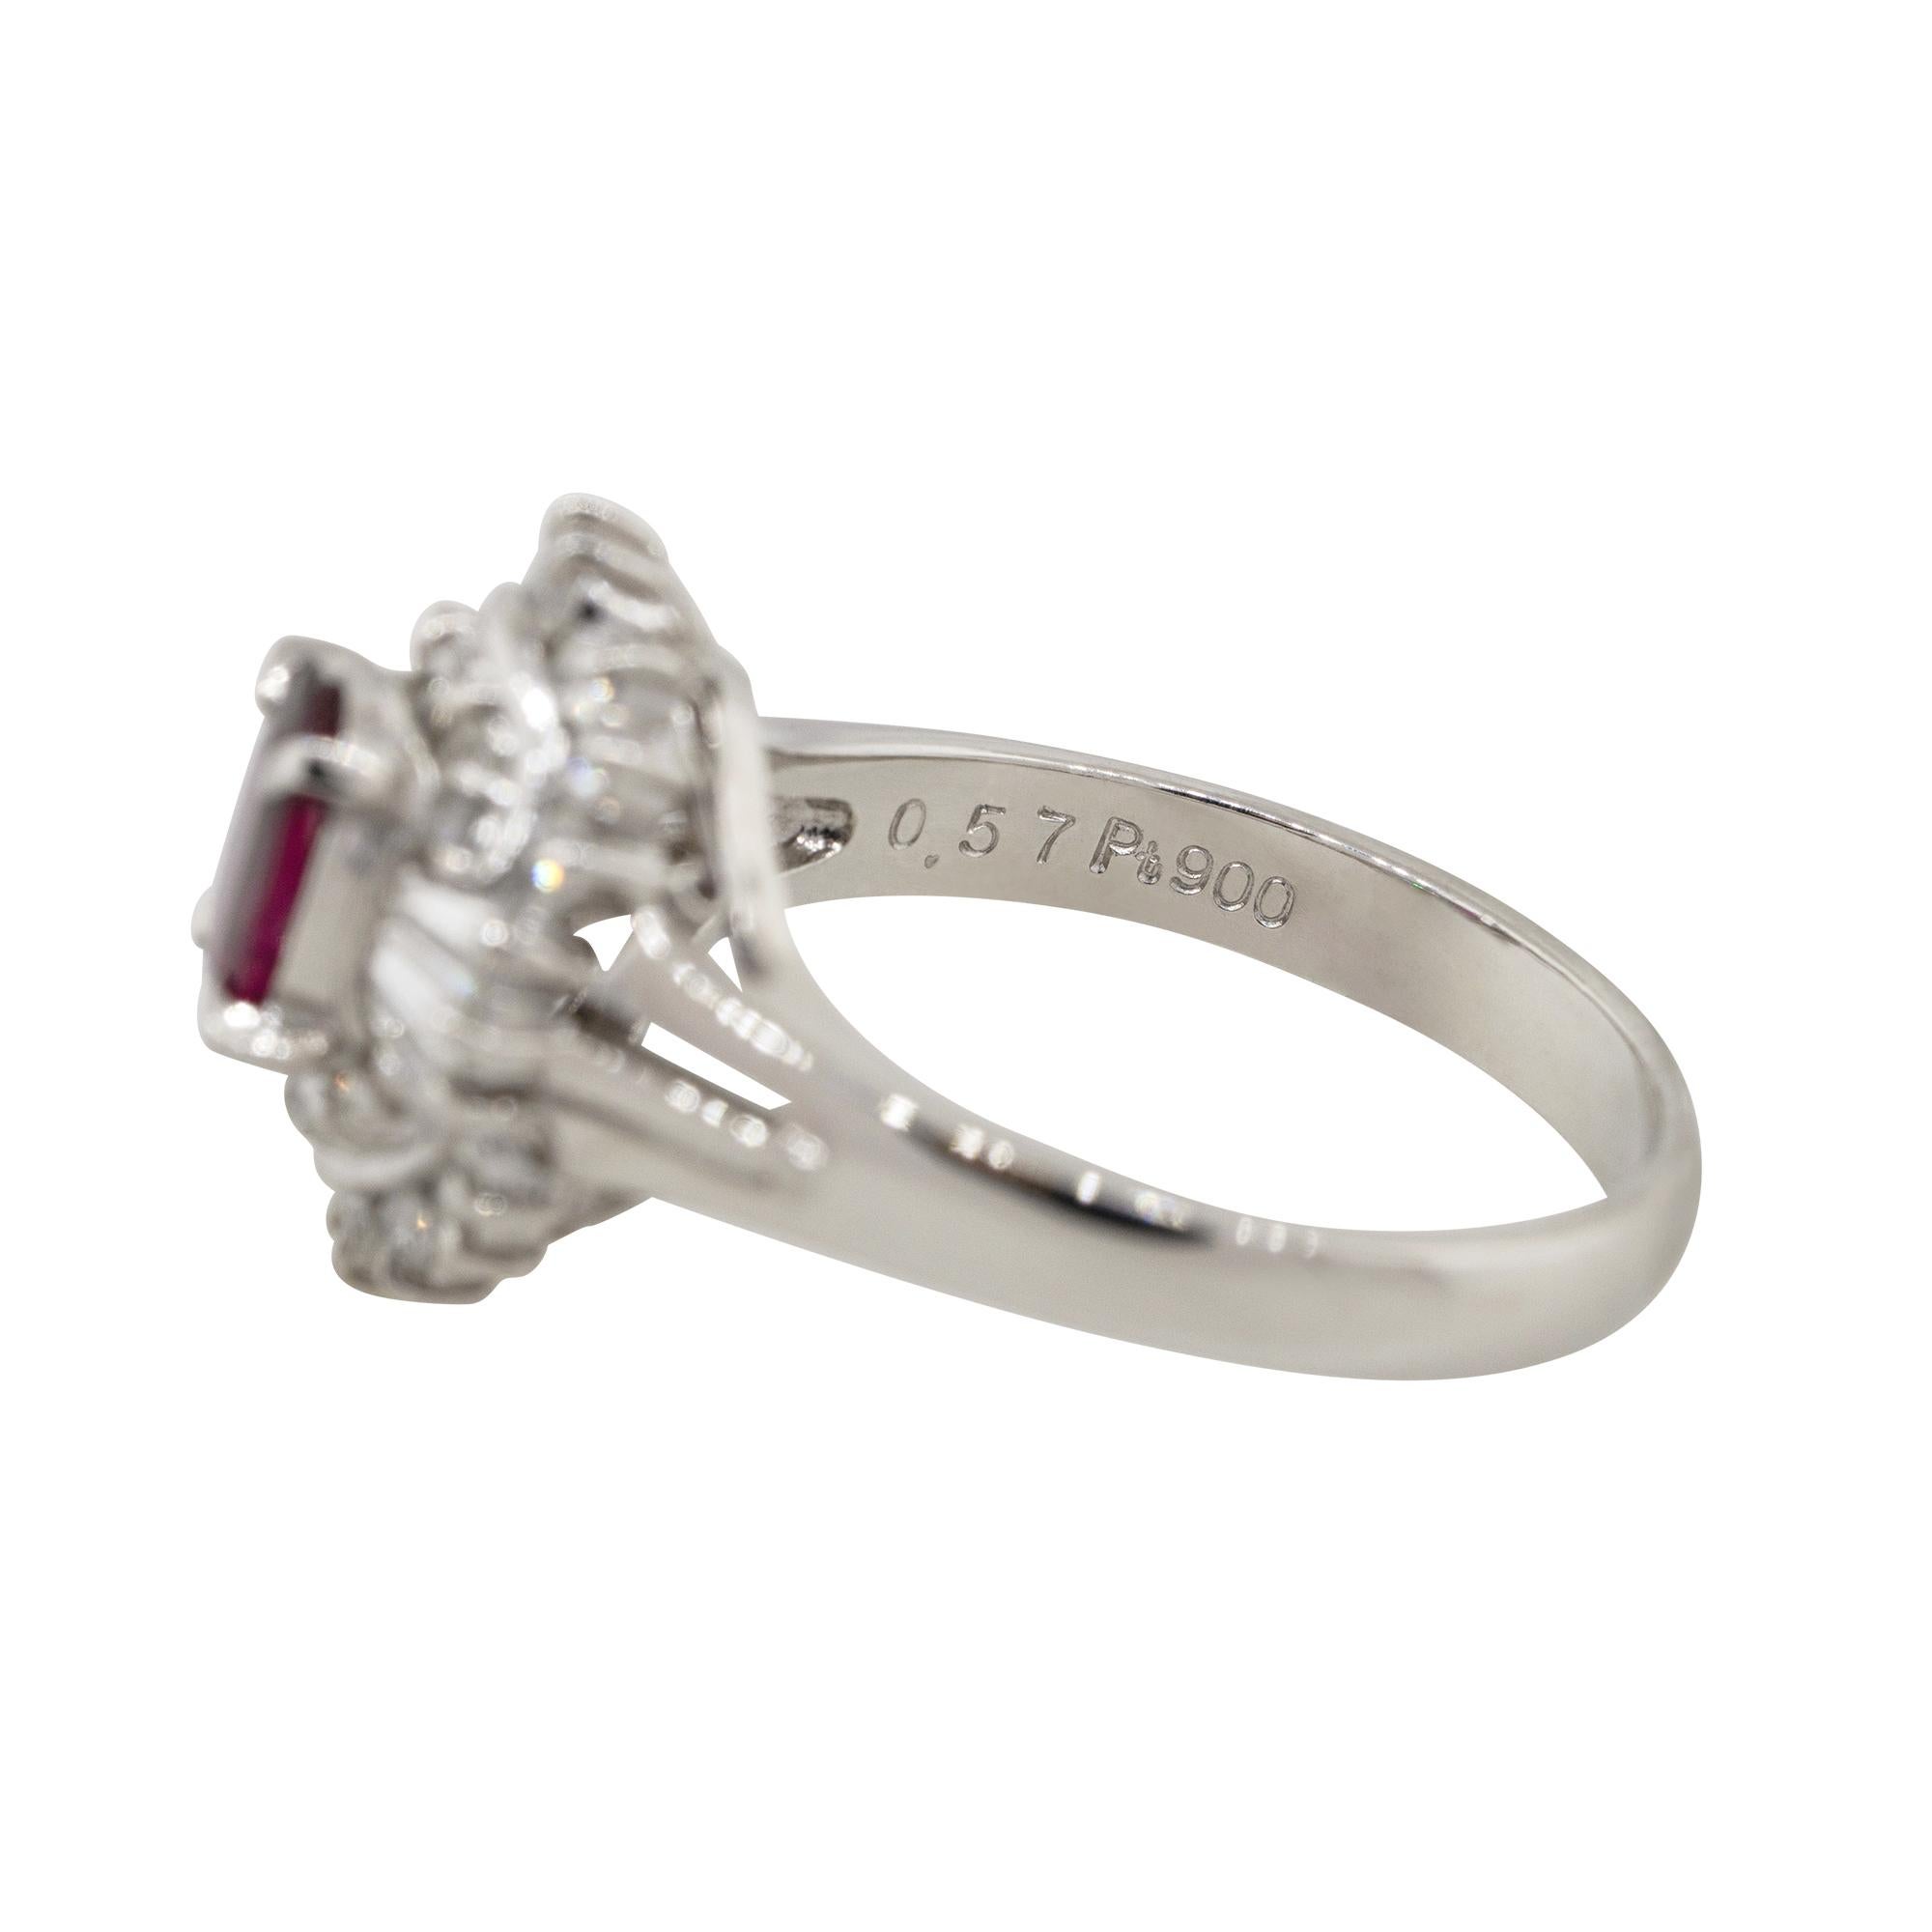 0.57 Carat Oval Ruby Center Diamond Cocktail Ring Platinum in Stock In New Condition For Sale In Boca Raton, FL